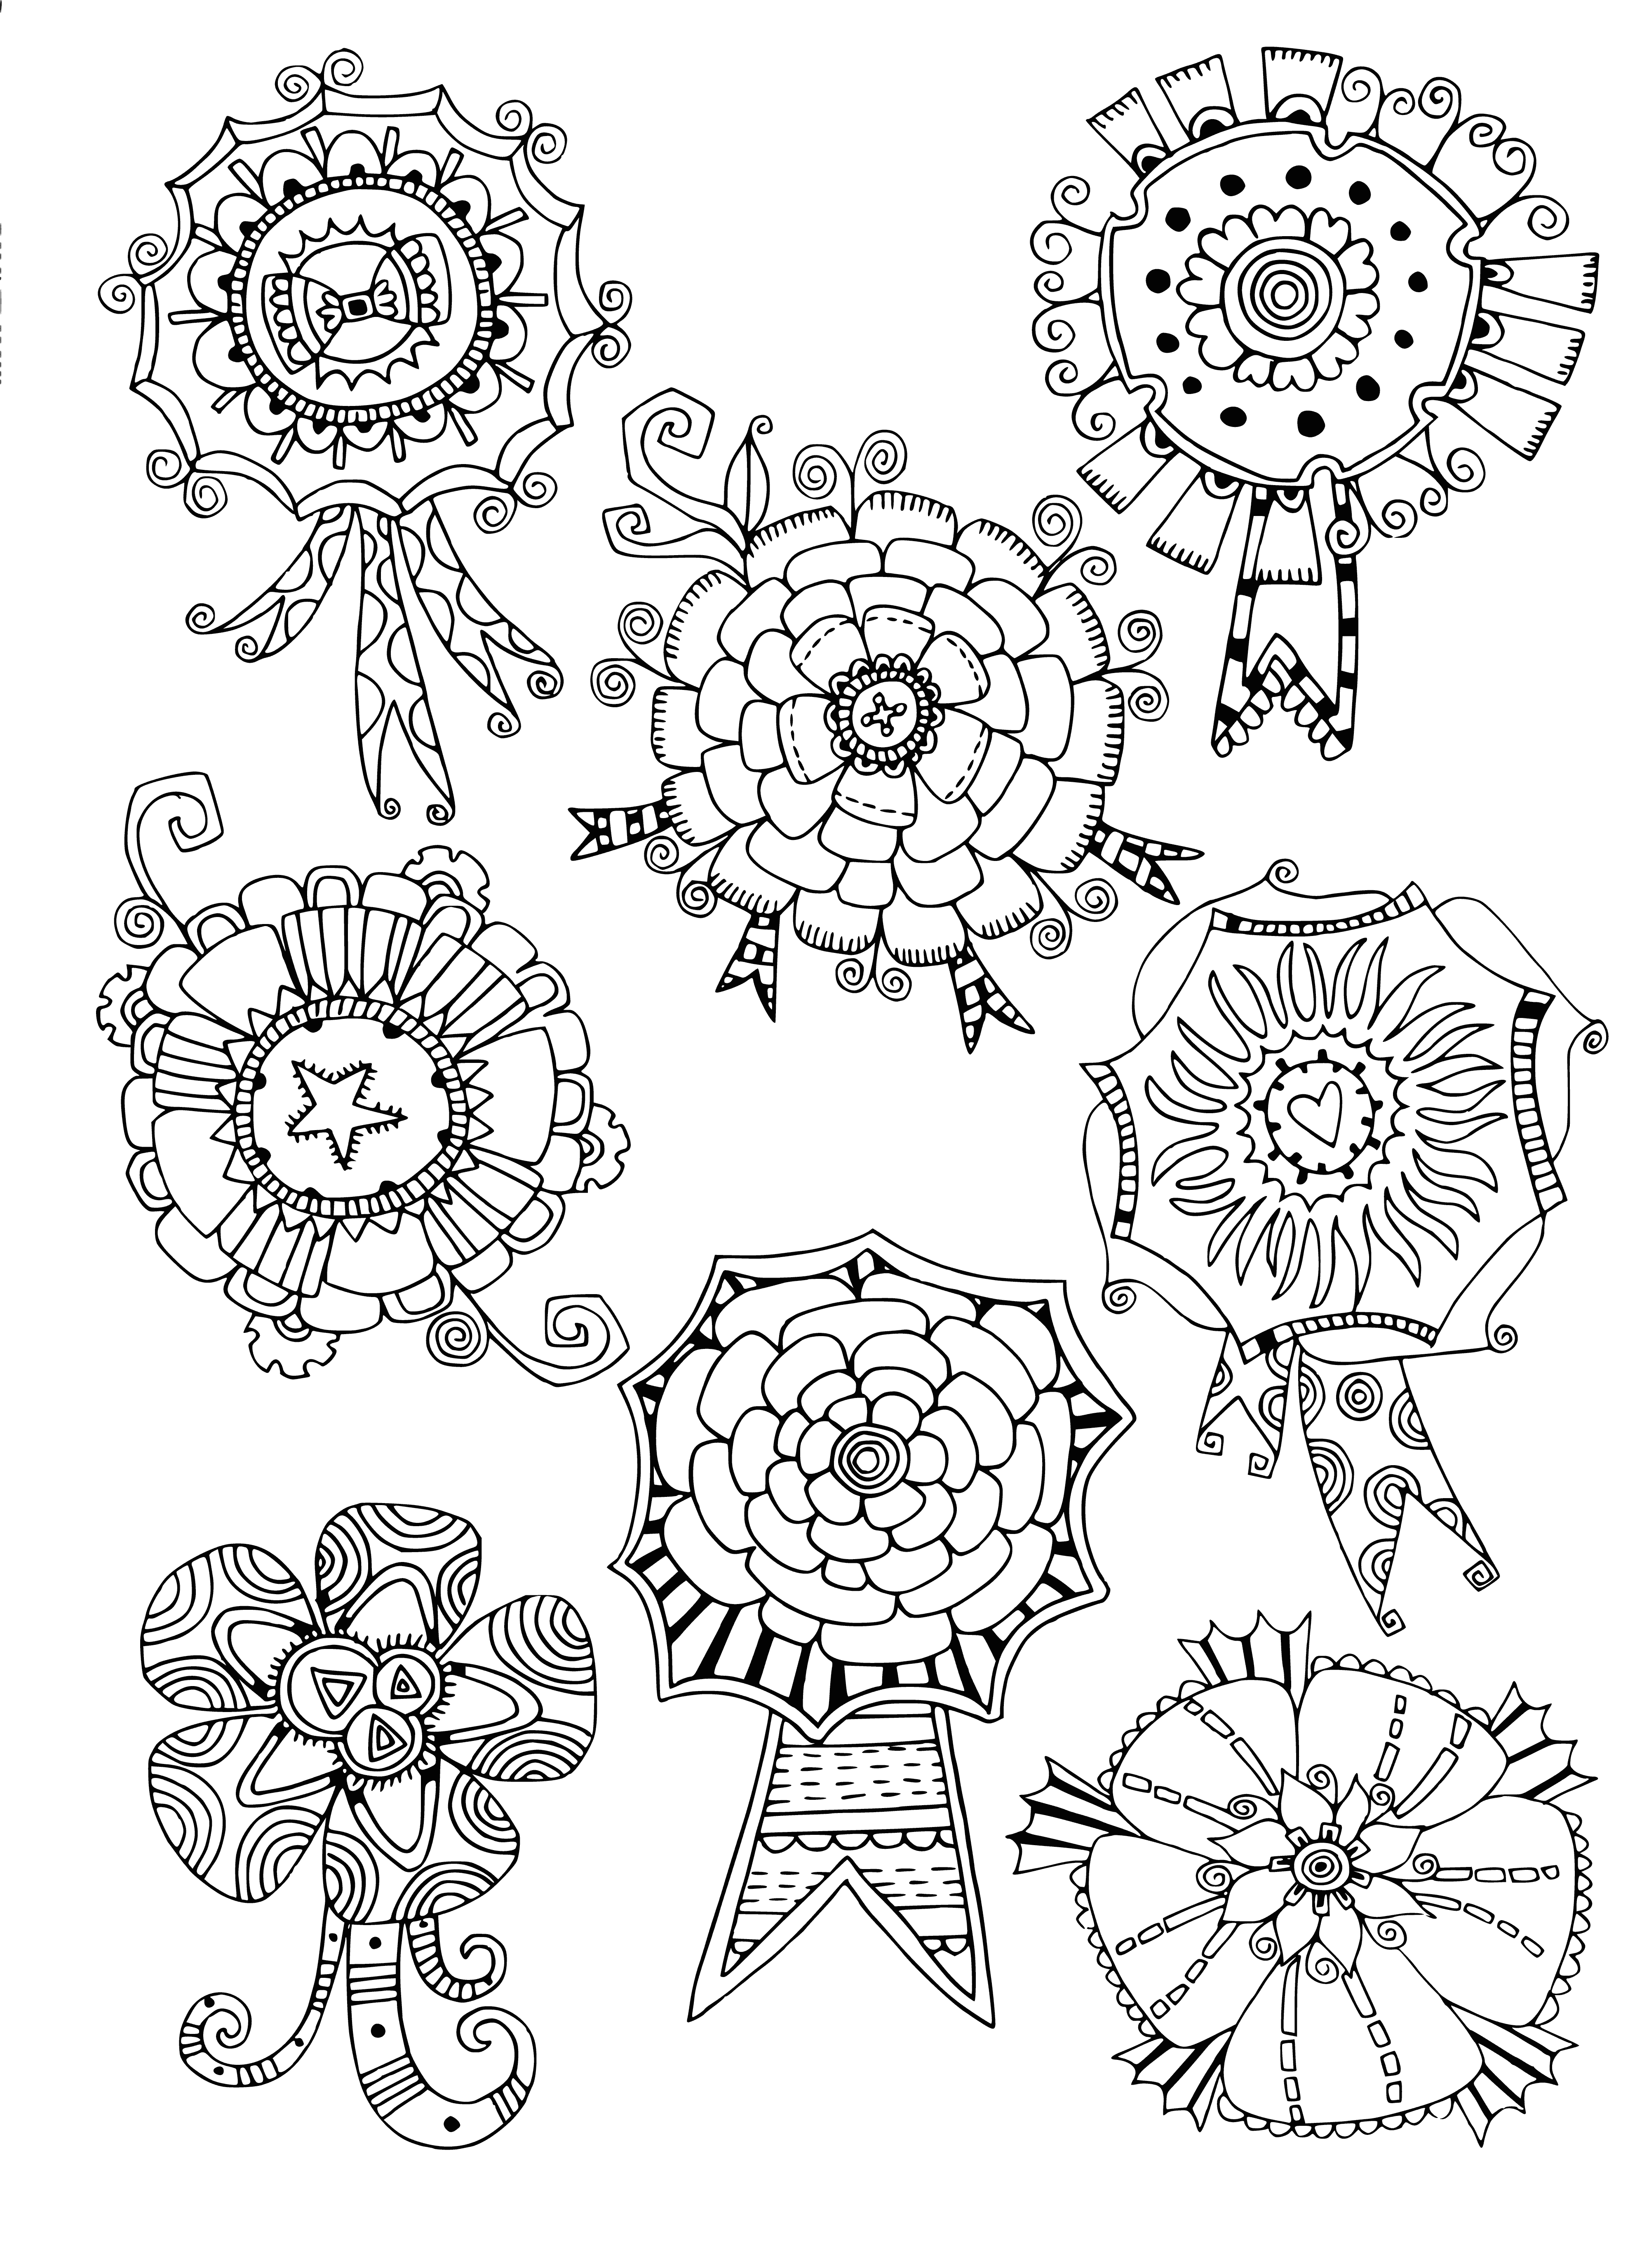 coloring page: Kids' coloring page of various flowers in red, pink, yellow & white on a green background.